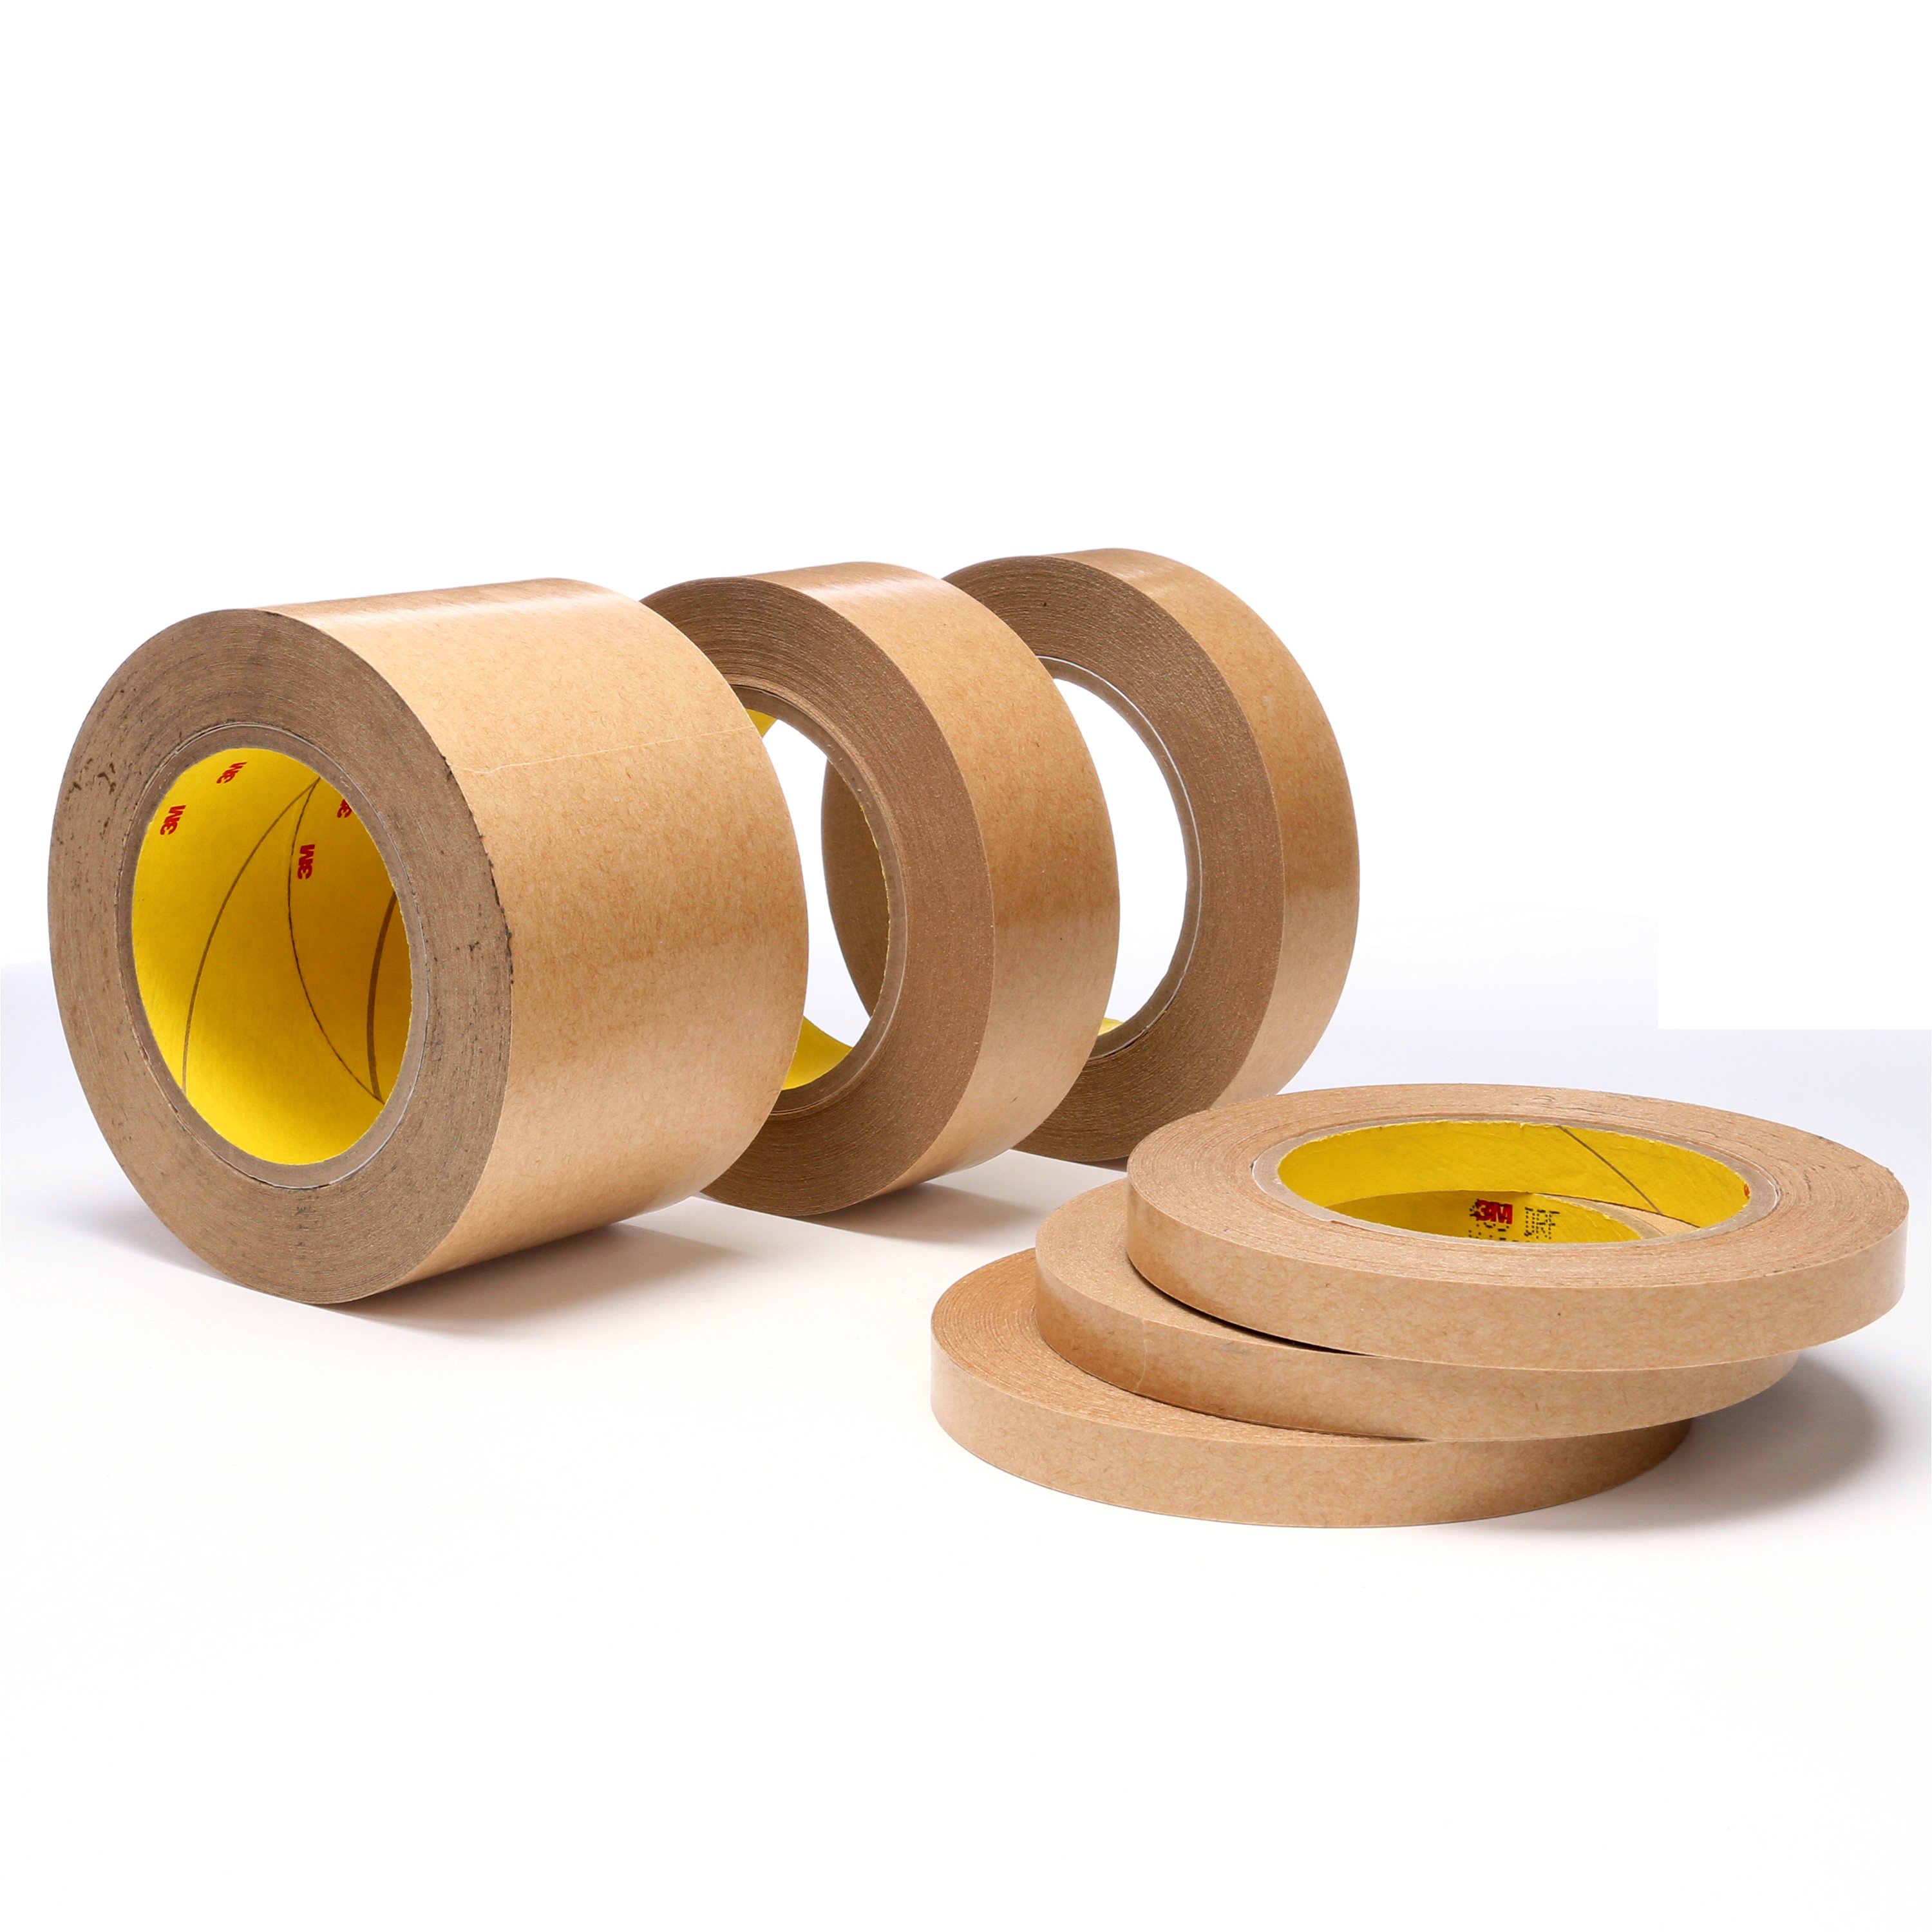 6 ROLLS 3M 465 Adhesive Transfer Tape 3 in x 60 yd  2 mil 